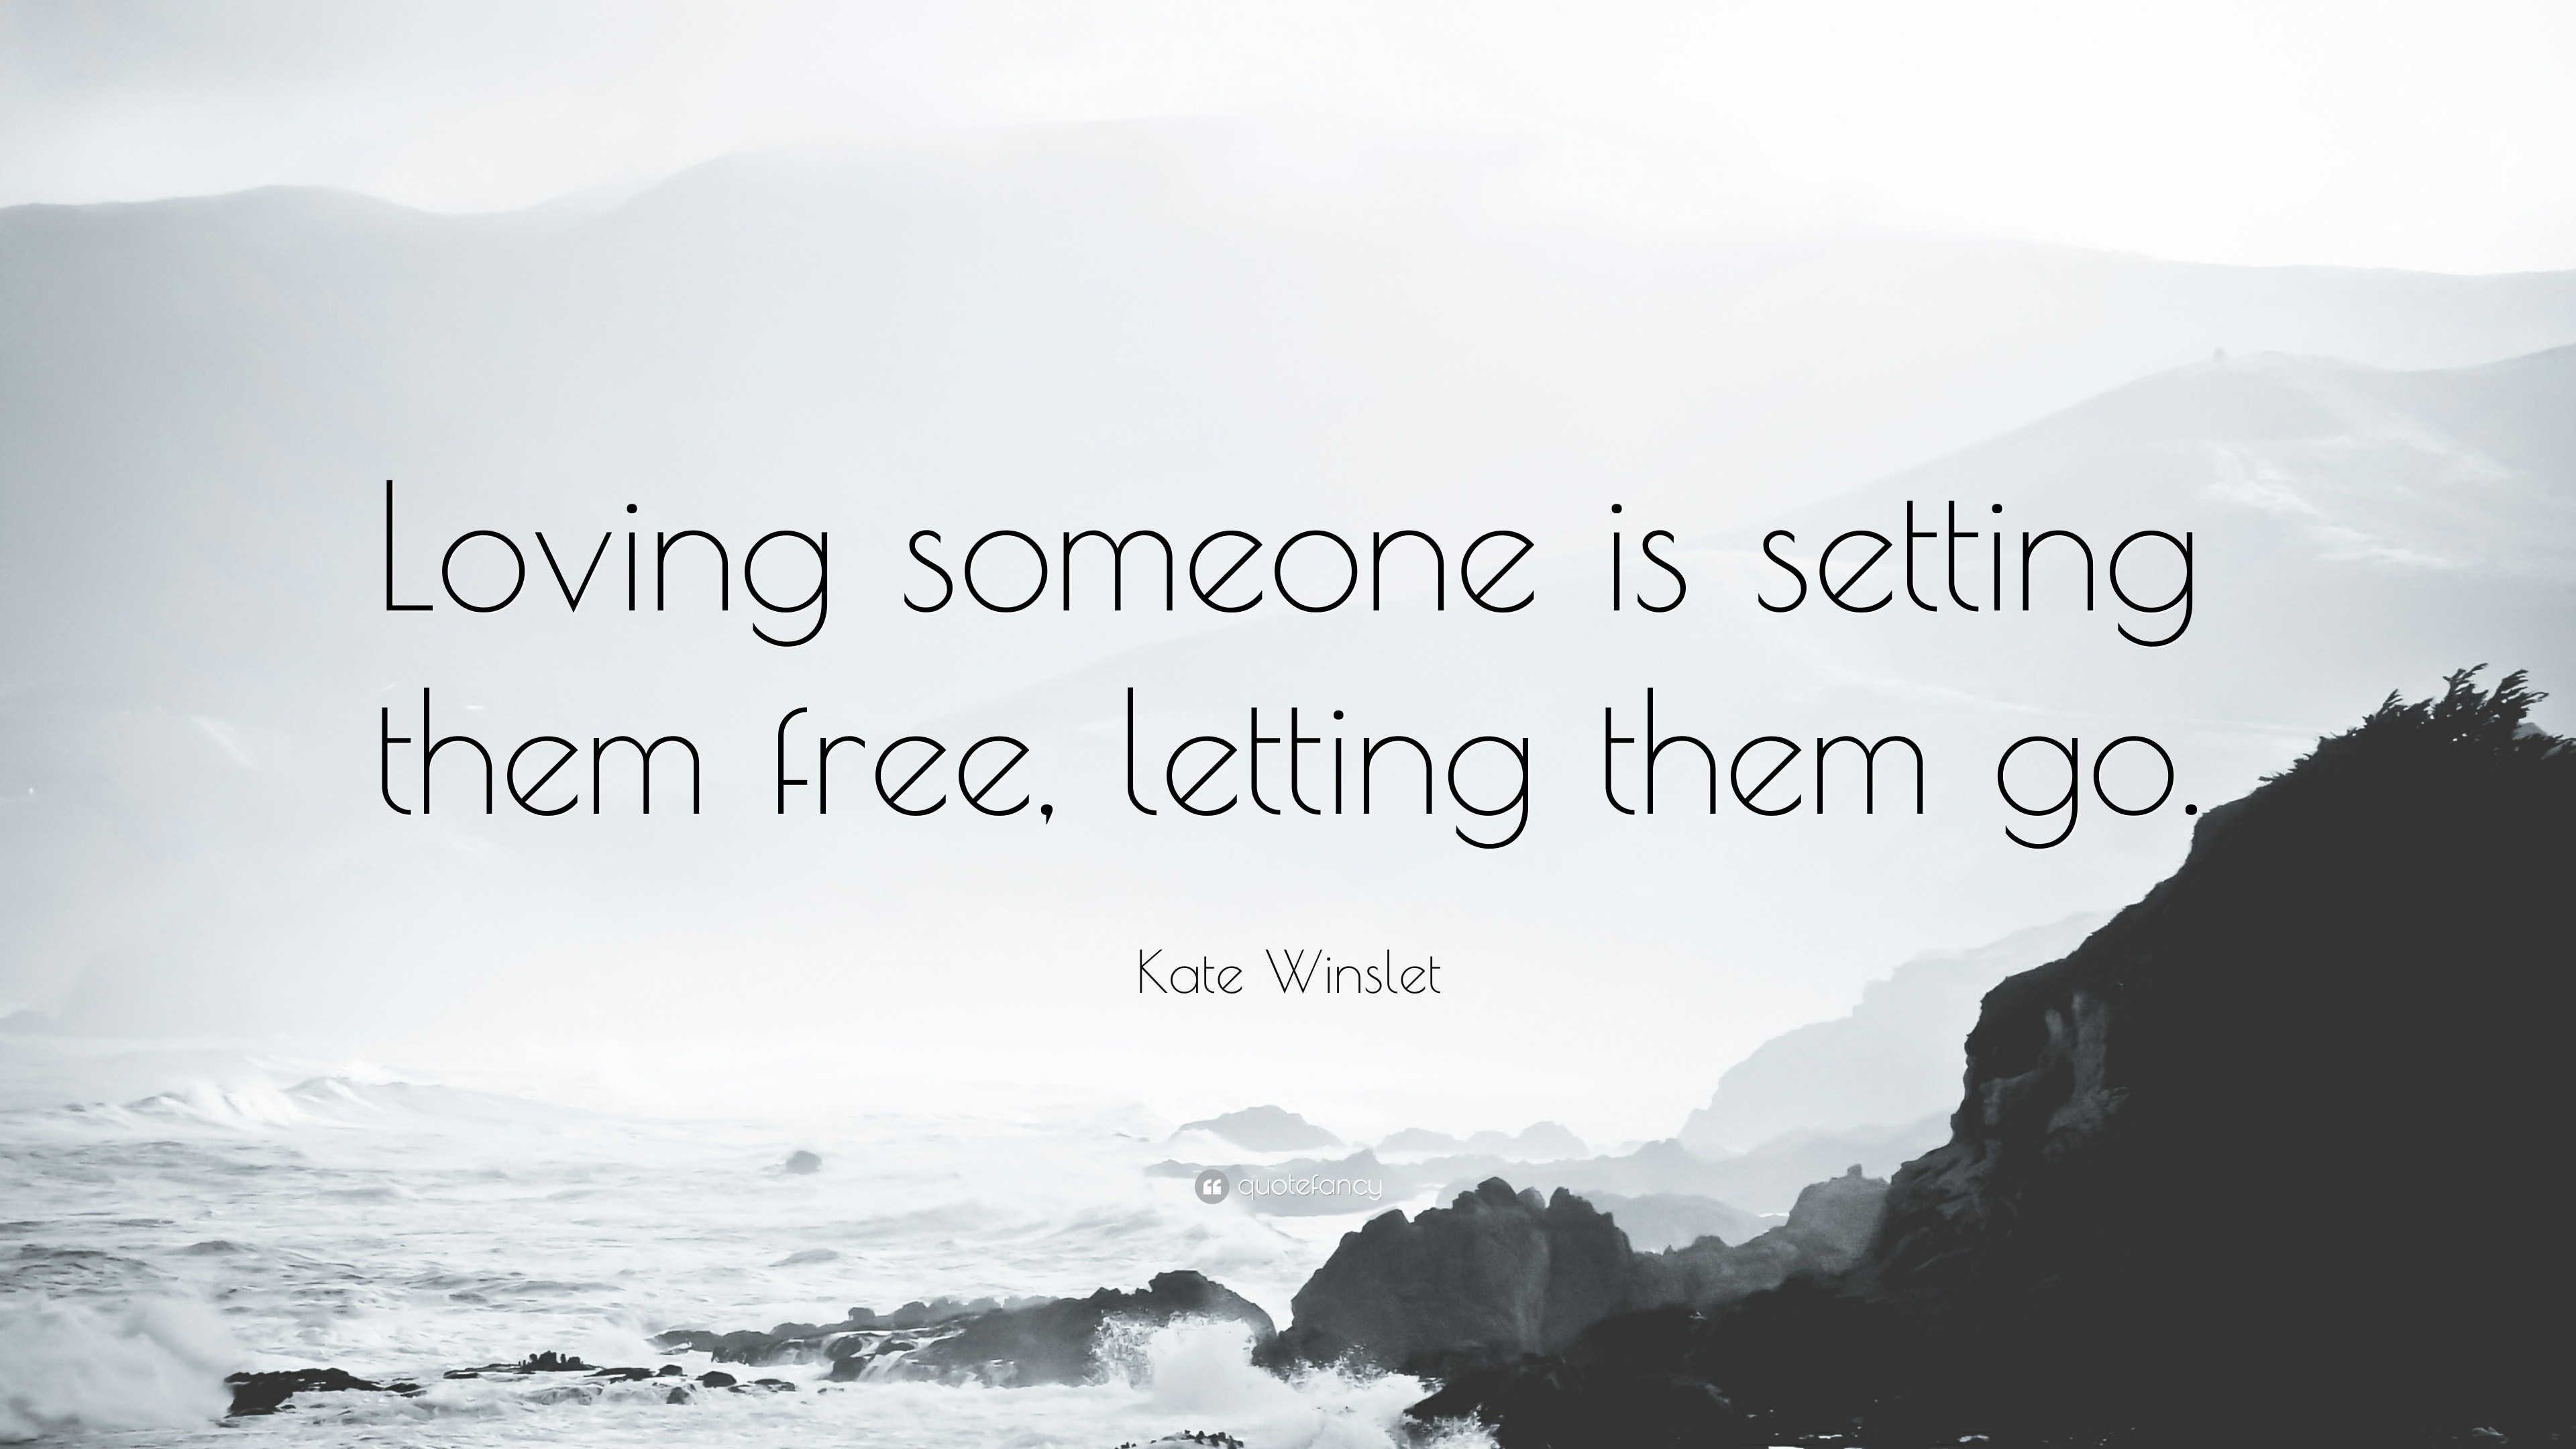 Kate Winslet Quote “Loving someone is setting them free letting them go